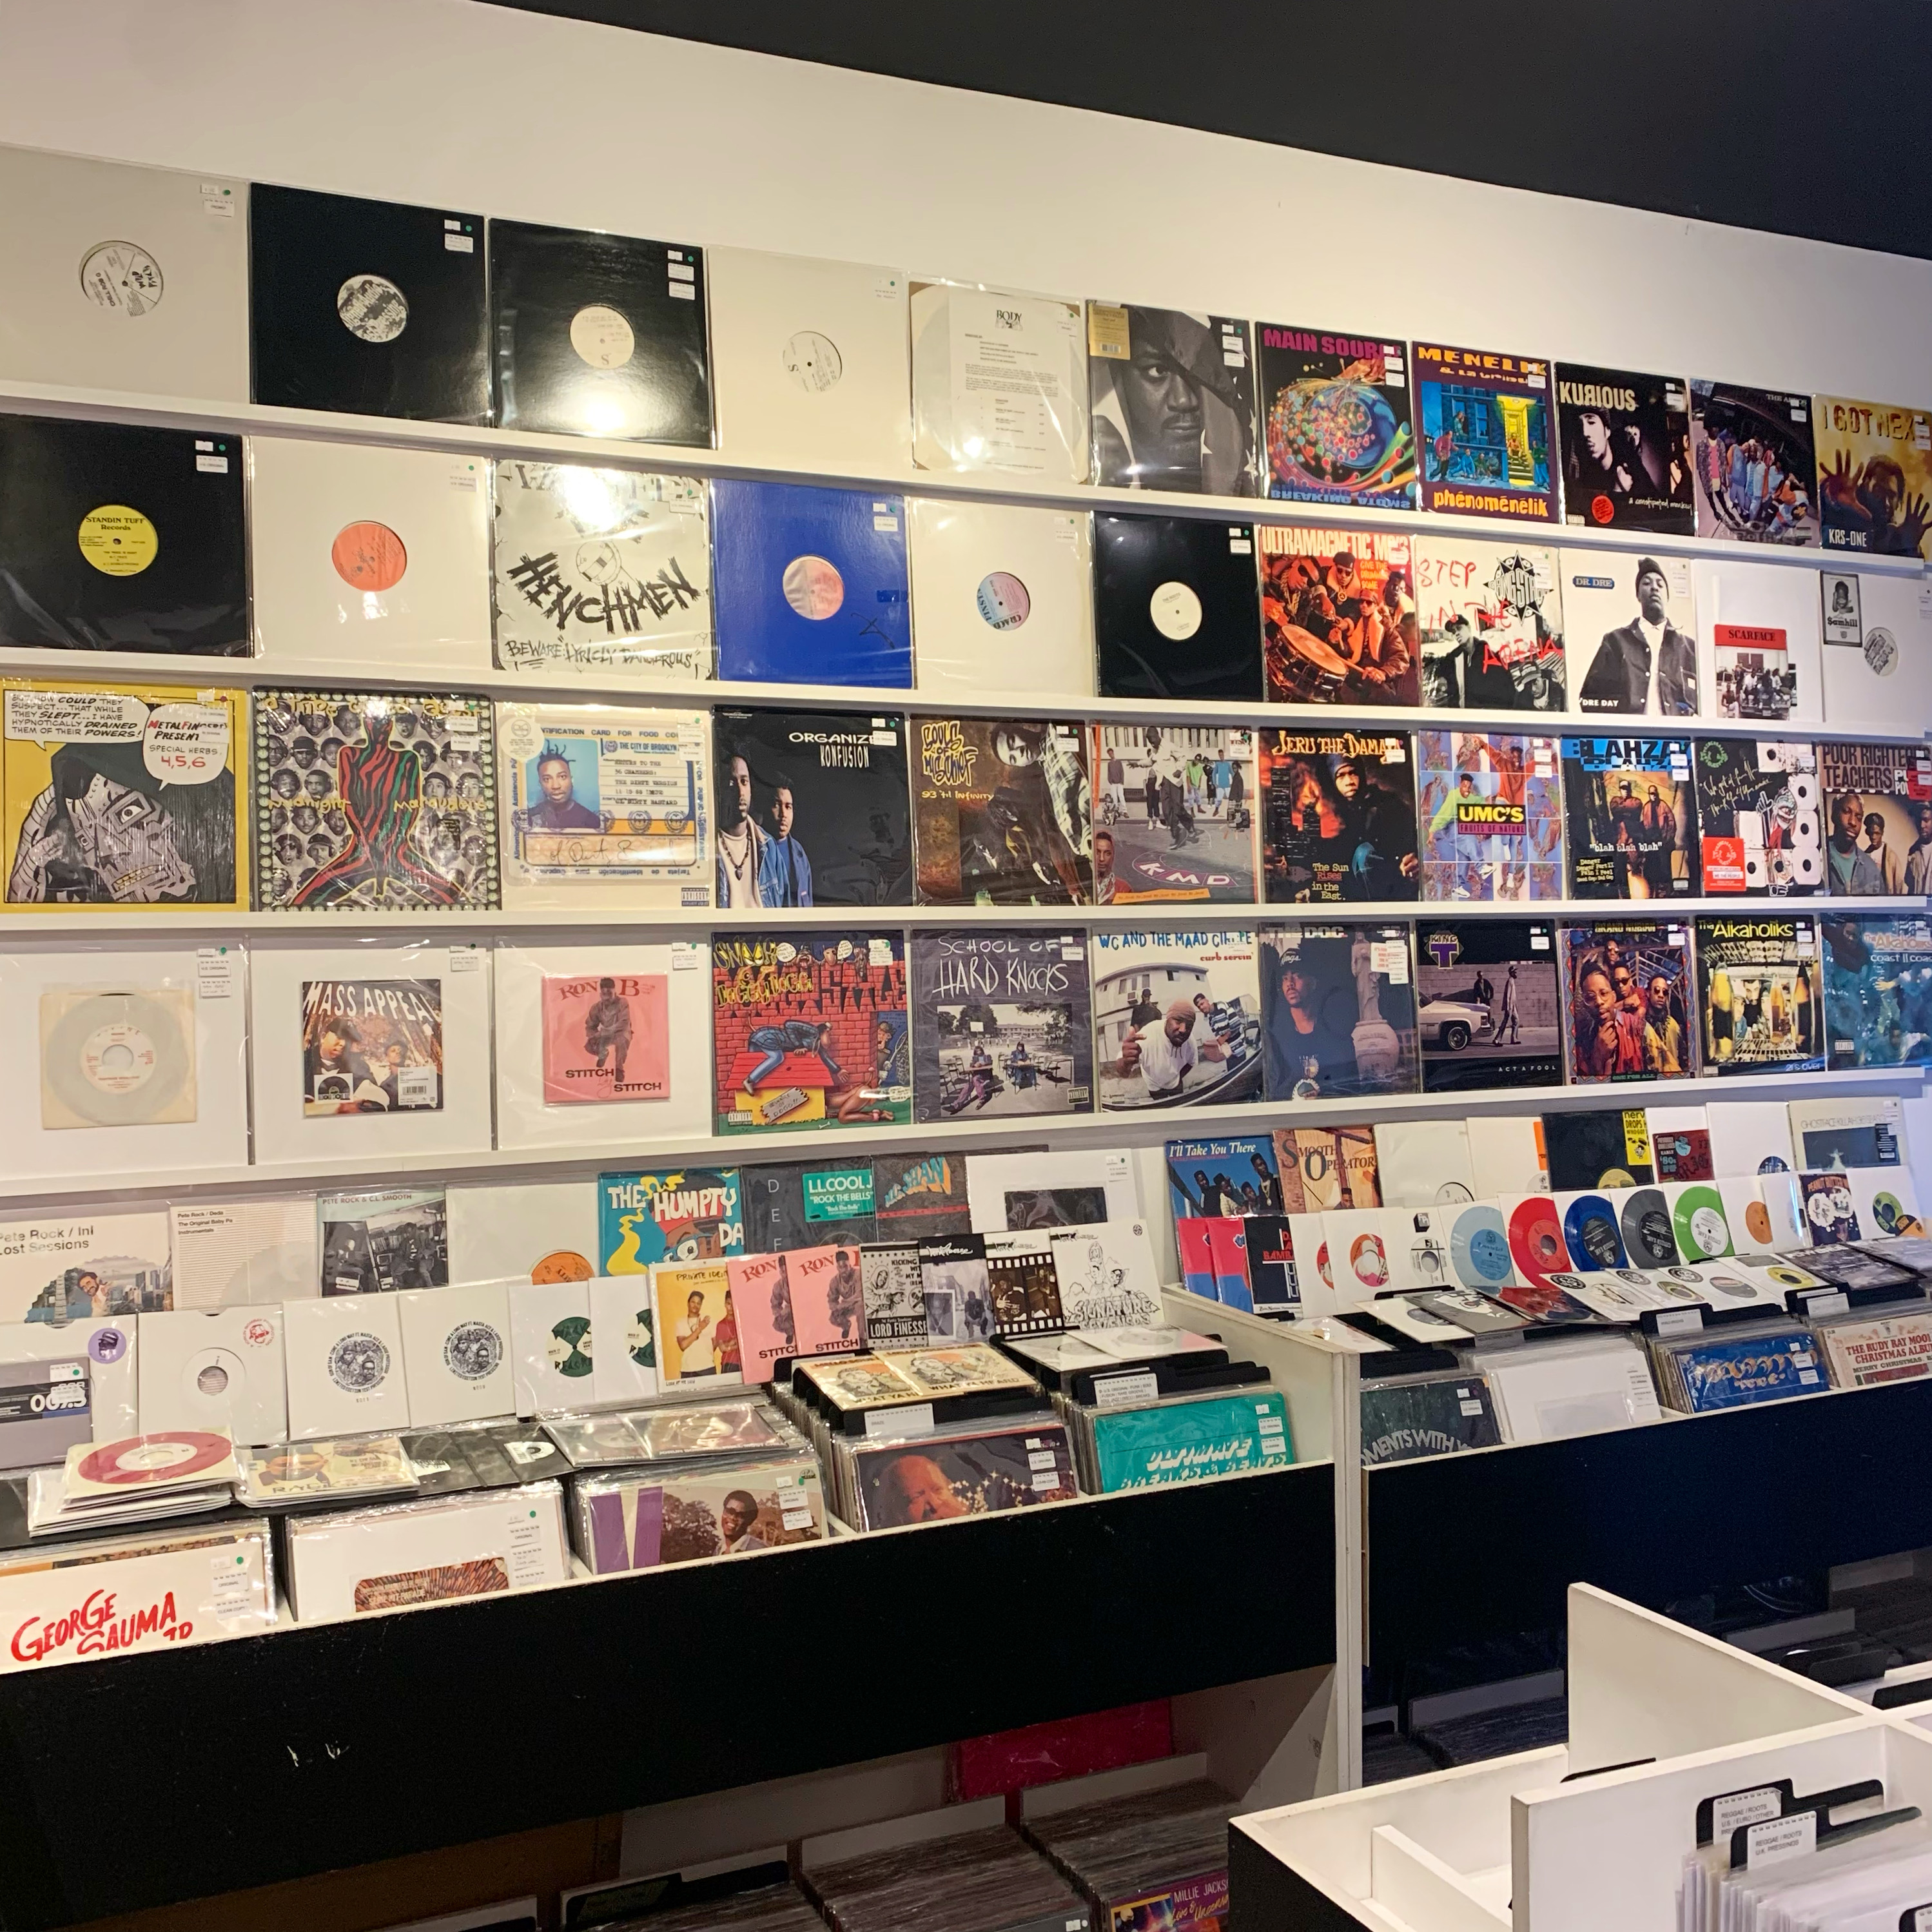 Yo-Yo Records London on Twitter: "Our holiday hip drop is here!!! #newarrivals Origjnals and vintage pressings. Open at noon first first served thank you! ✌️ #originalpressings #vintagepressjngs #hiphop #classichiphop #vinyl #